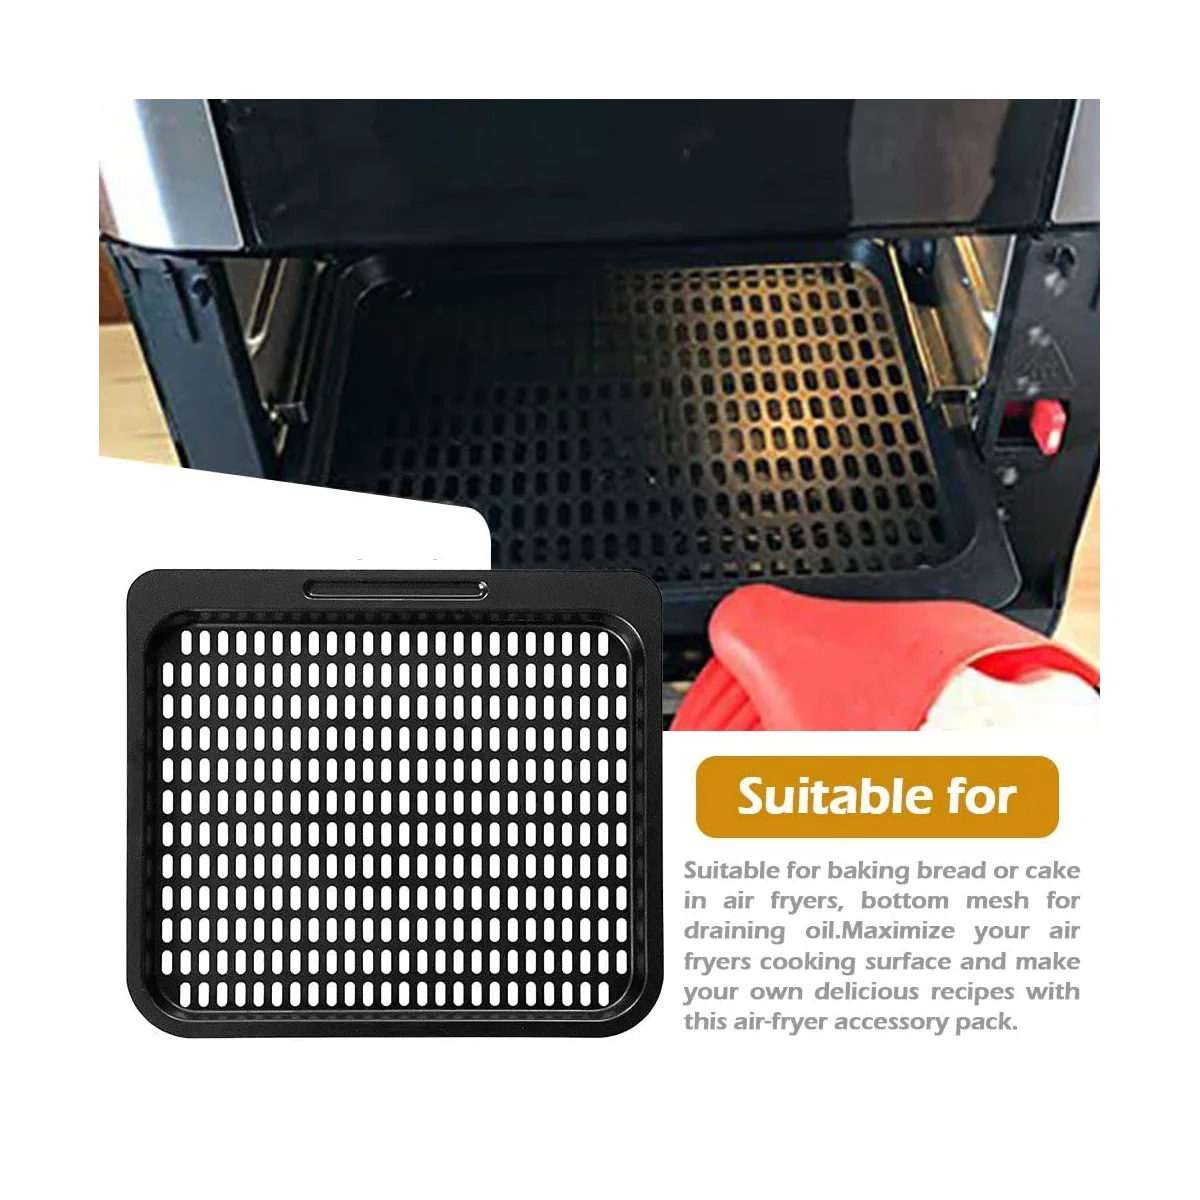 https://ae01.alicdn.com/kf/S9bd86ae1530140a184016804a7f6e5f9T/Cooking-Tray-Replacement-Mesh-Cooking-Rack-Air-Fryer-Accessories-for-Instant-Vortex-Chefman-and-Other-Air.jpg